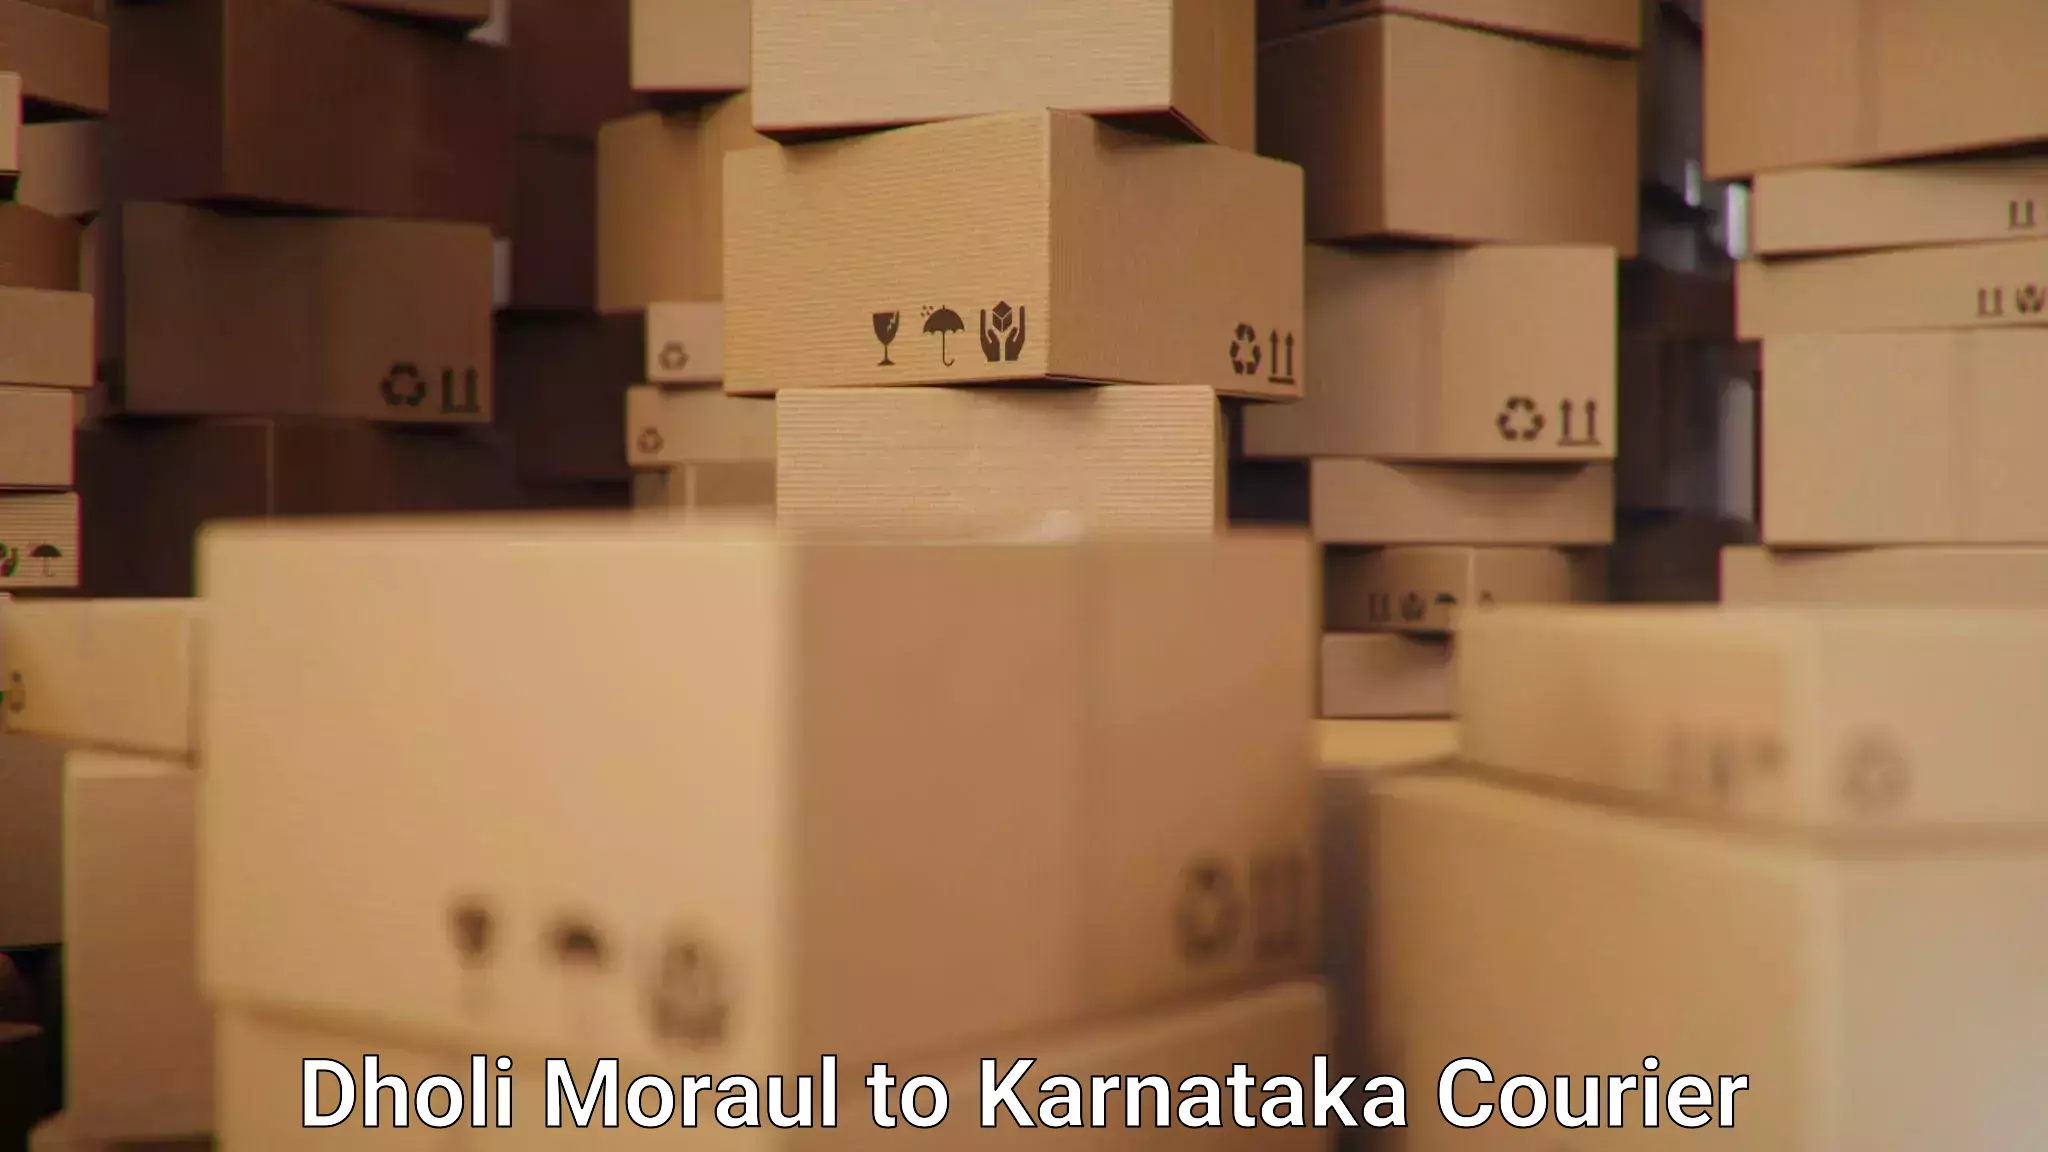 Quality courier partnerships Dholi Moraul to Shorapur